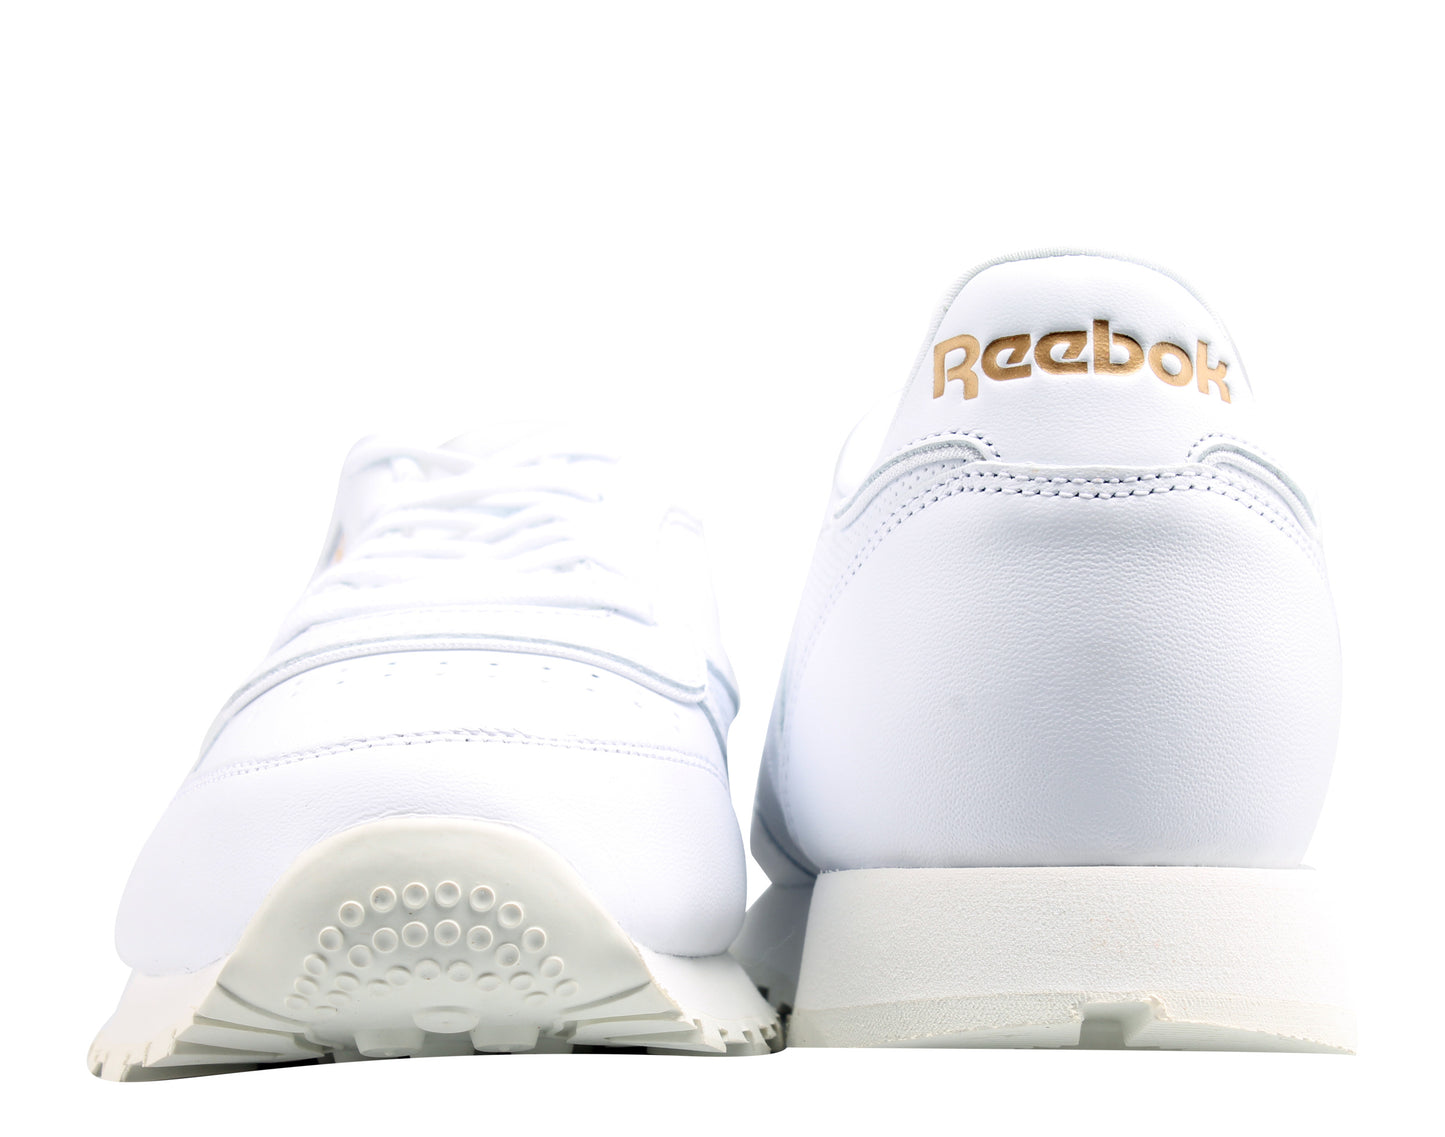 Reebok Classic Leather ALR Men's Running Shoes